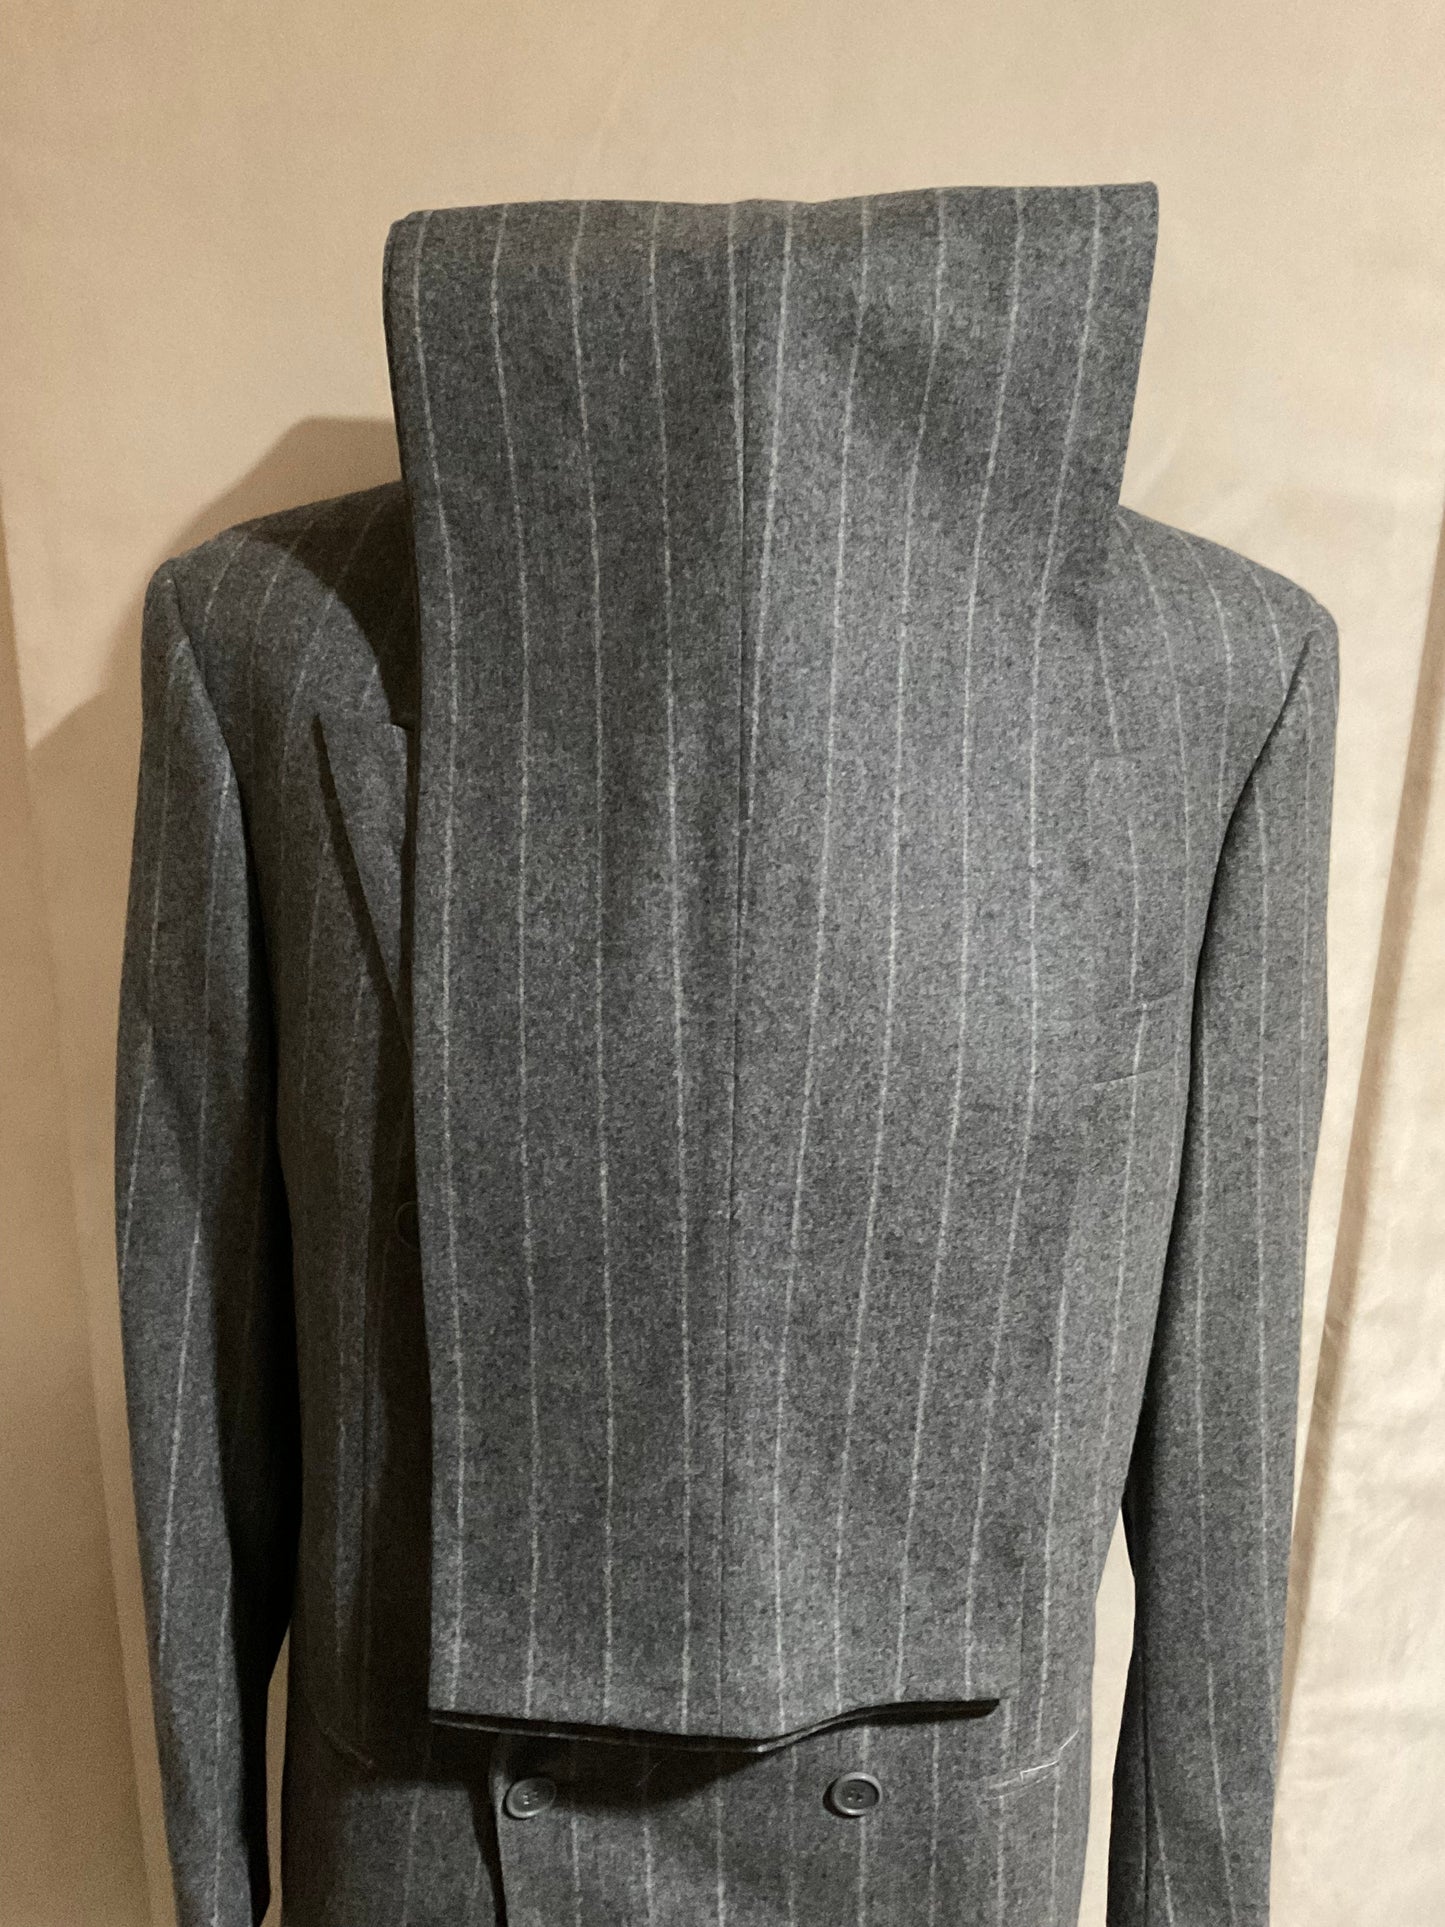 R P SUIT / DOUBLE BREASTED / CUSTOM BESPOKE / GREY CHALK STRIPE / 40 REG / MADE IN ITALY